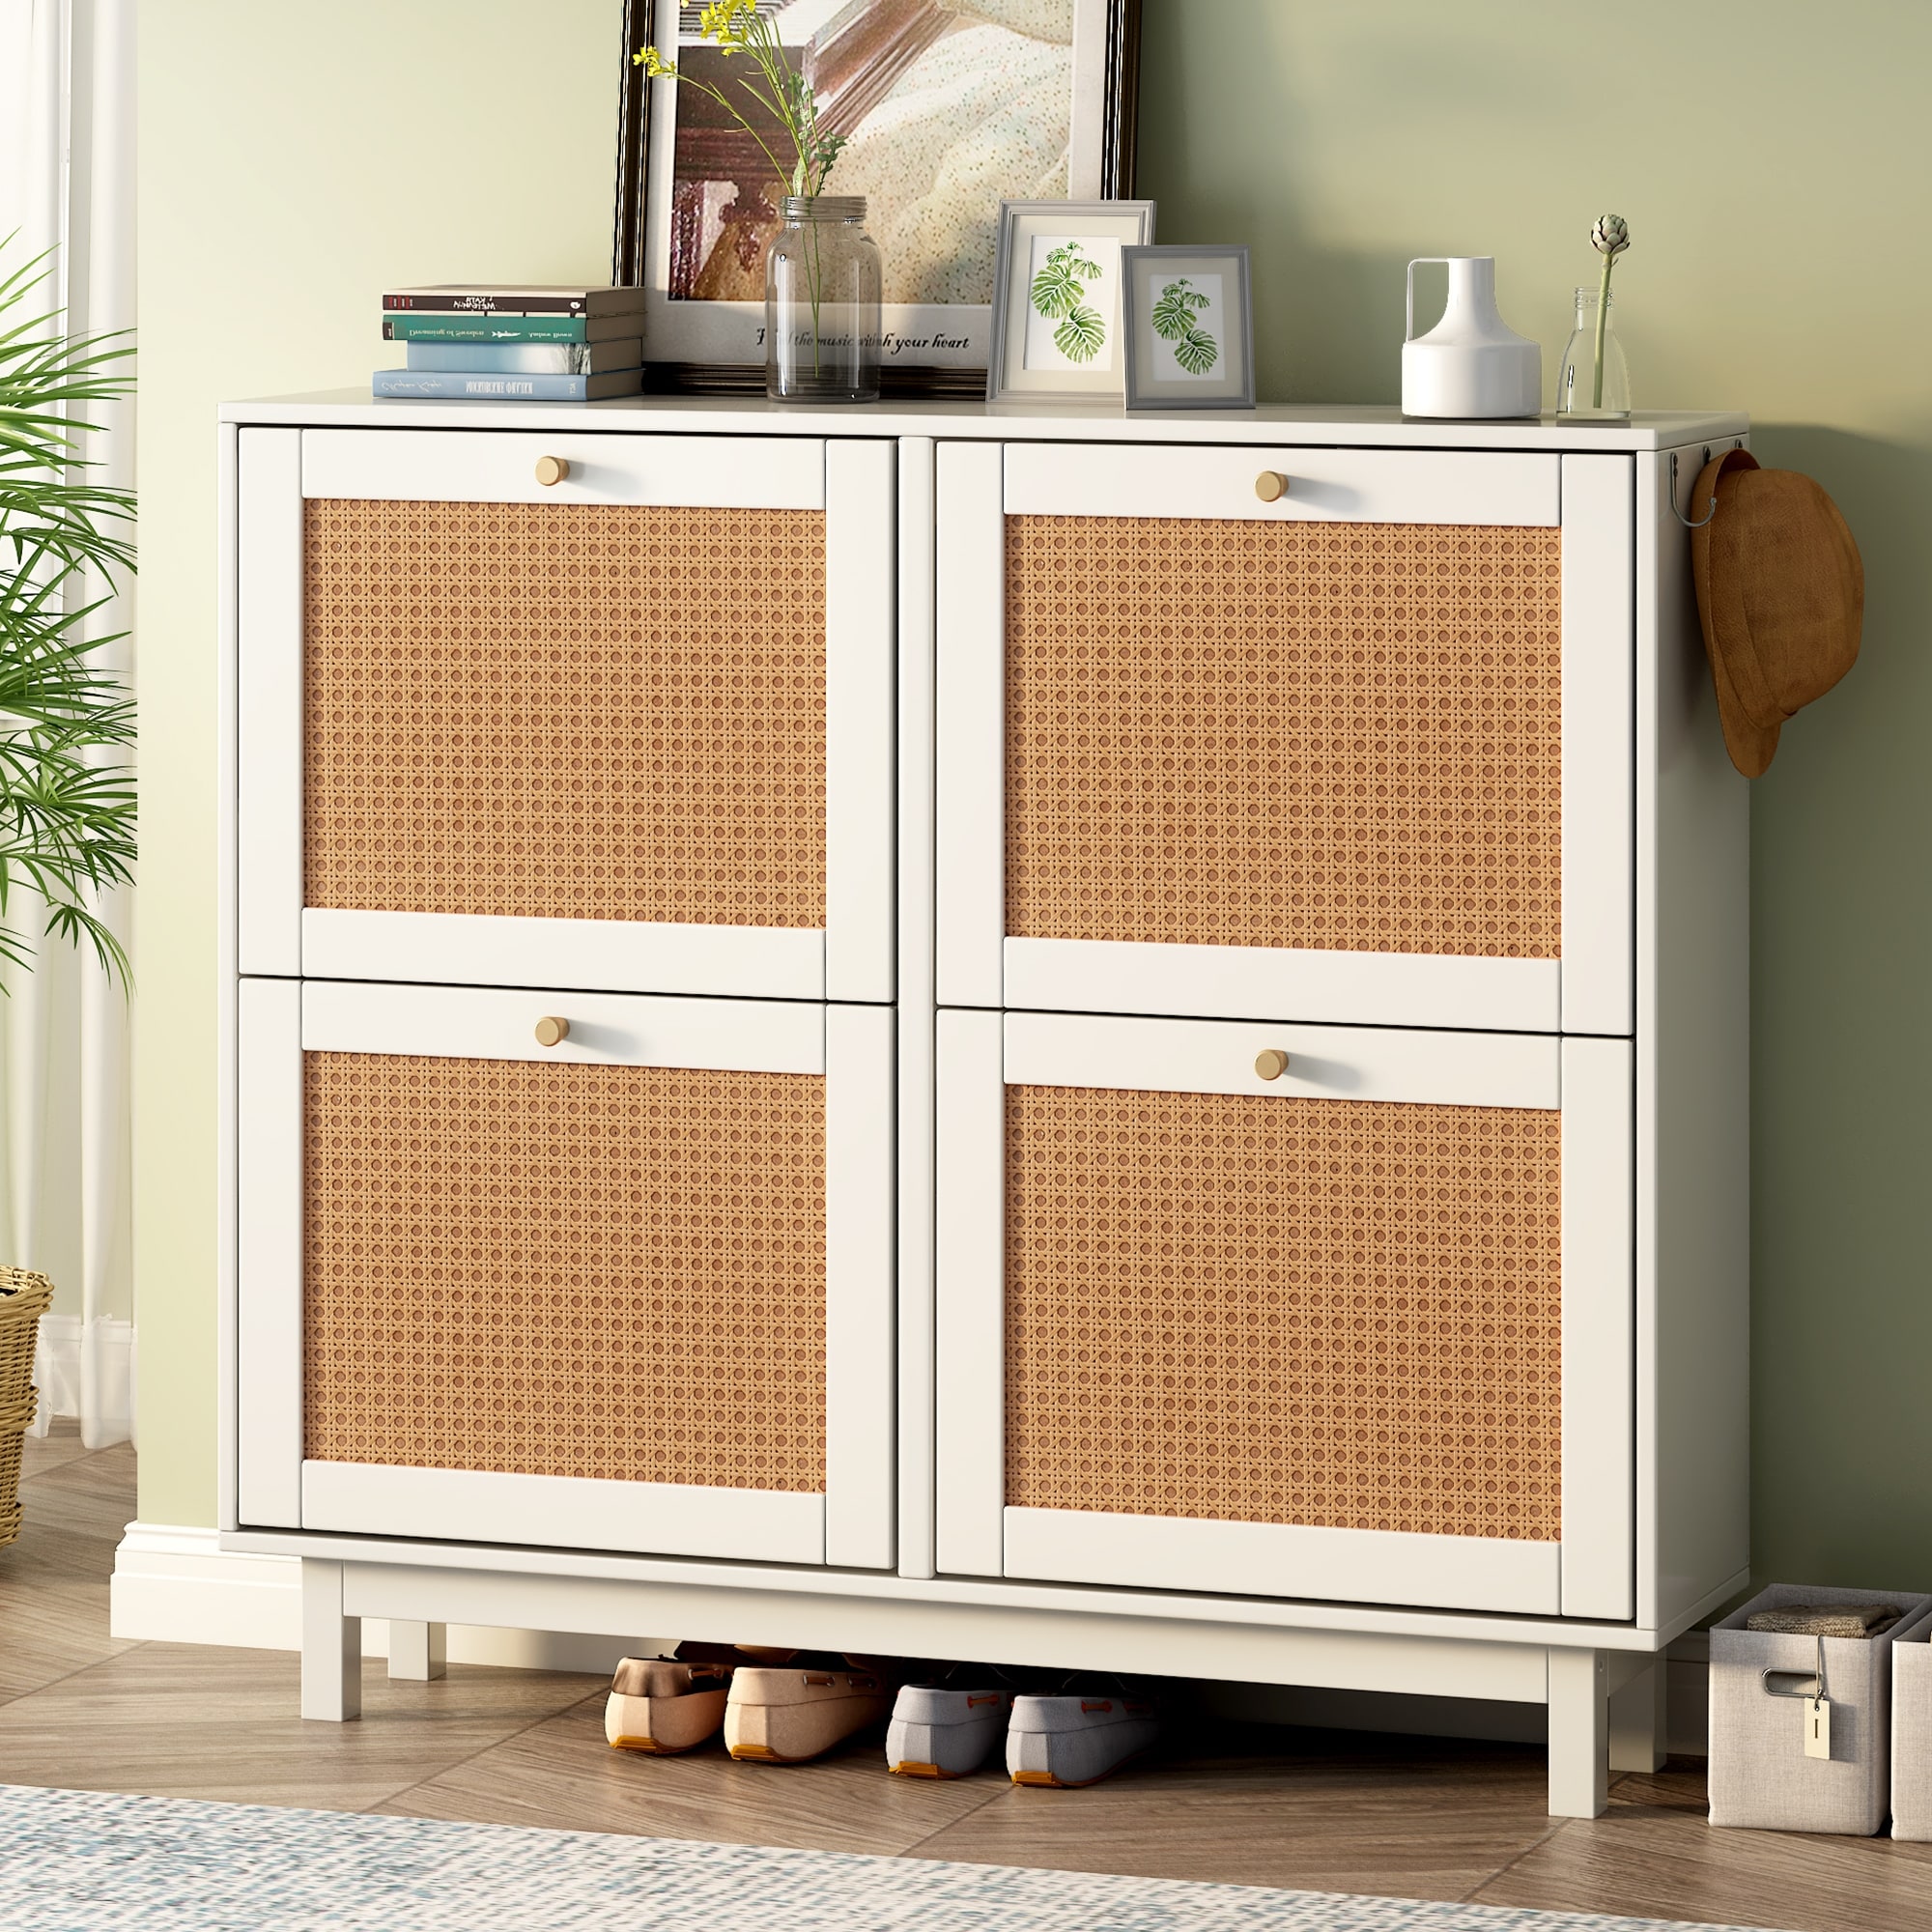 https://ak1.ostkcdn.com/images/products/is/images/direct/61b5155f1ba7d161344a79b10edf534cef0a8dc4/Boho-White-2-Tier-Entryway-Shoe-Cabinet-with-4-Flip-Drawers.jpg